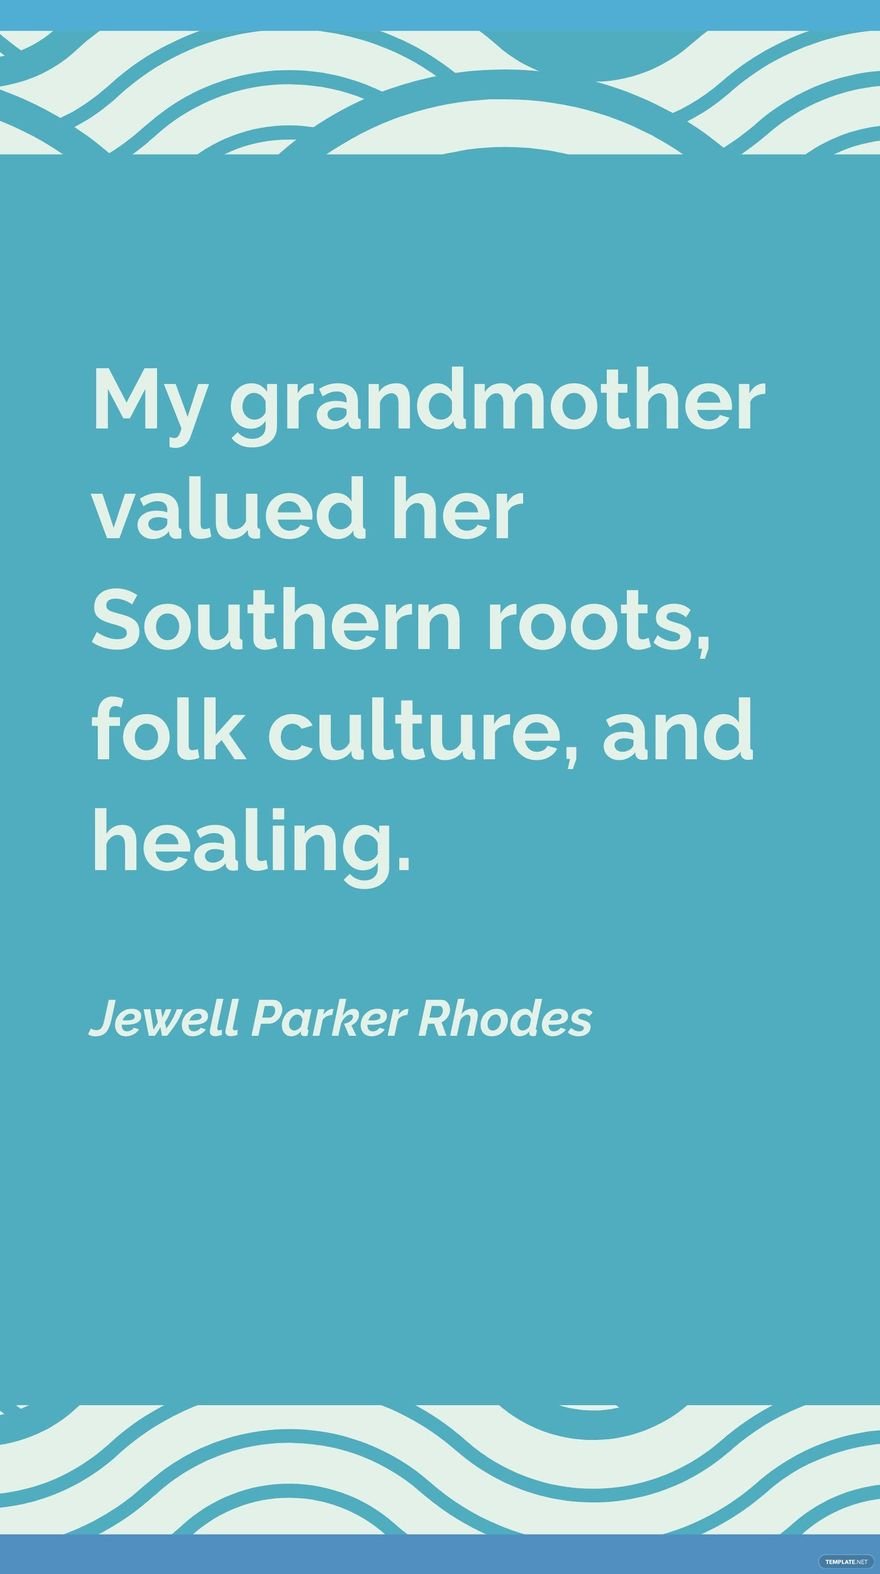 Jewell Parker Rhodes - My grandmother valued her Southern roots, folk culture, and healing. in JPG